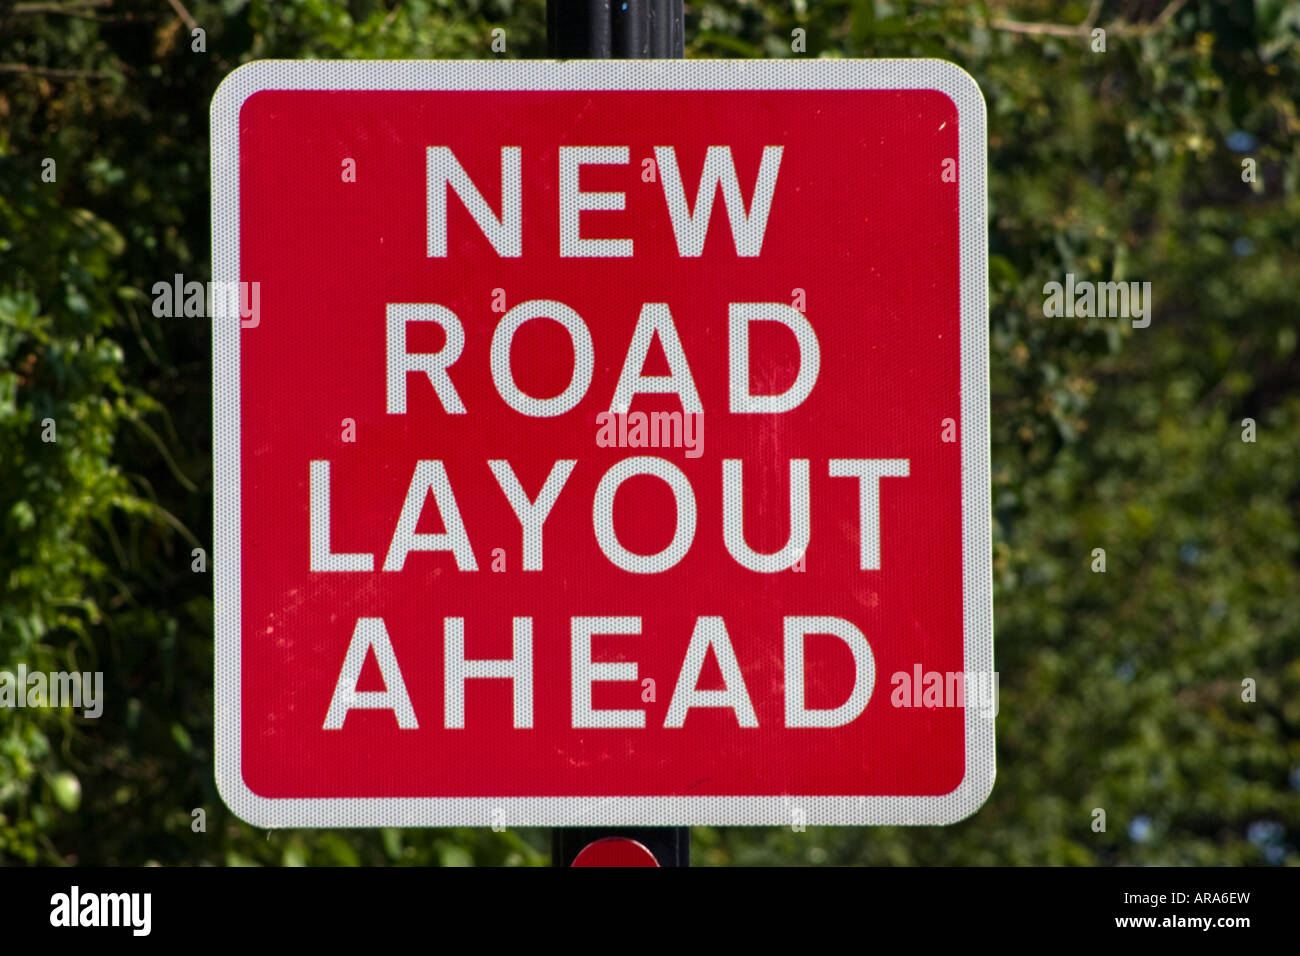 New road layout ahead road sign Stock Photo